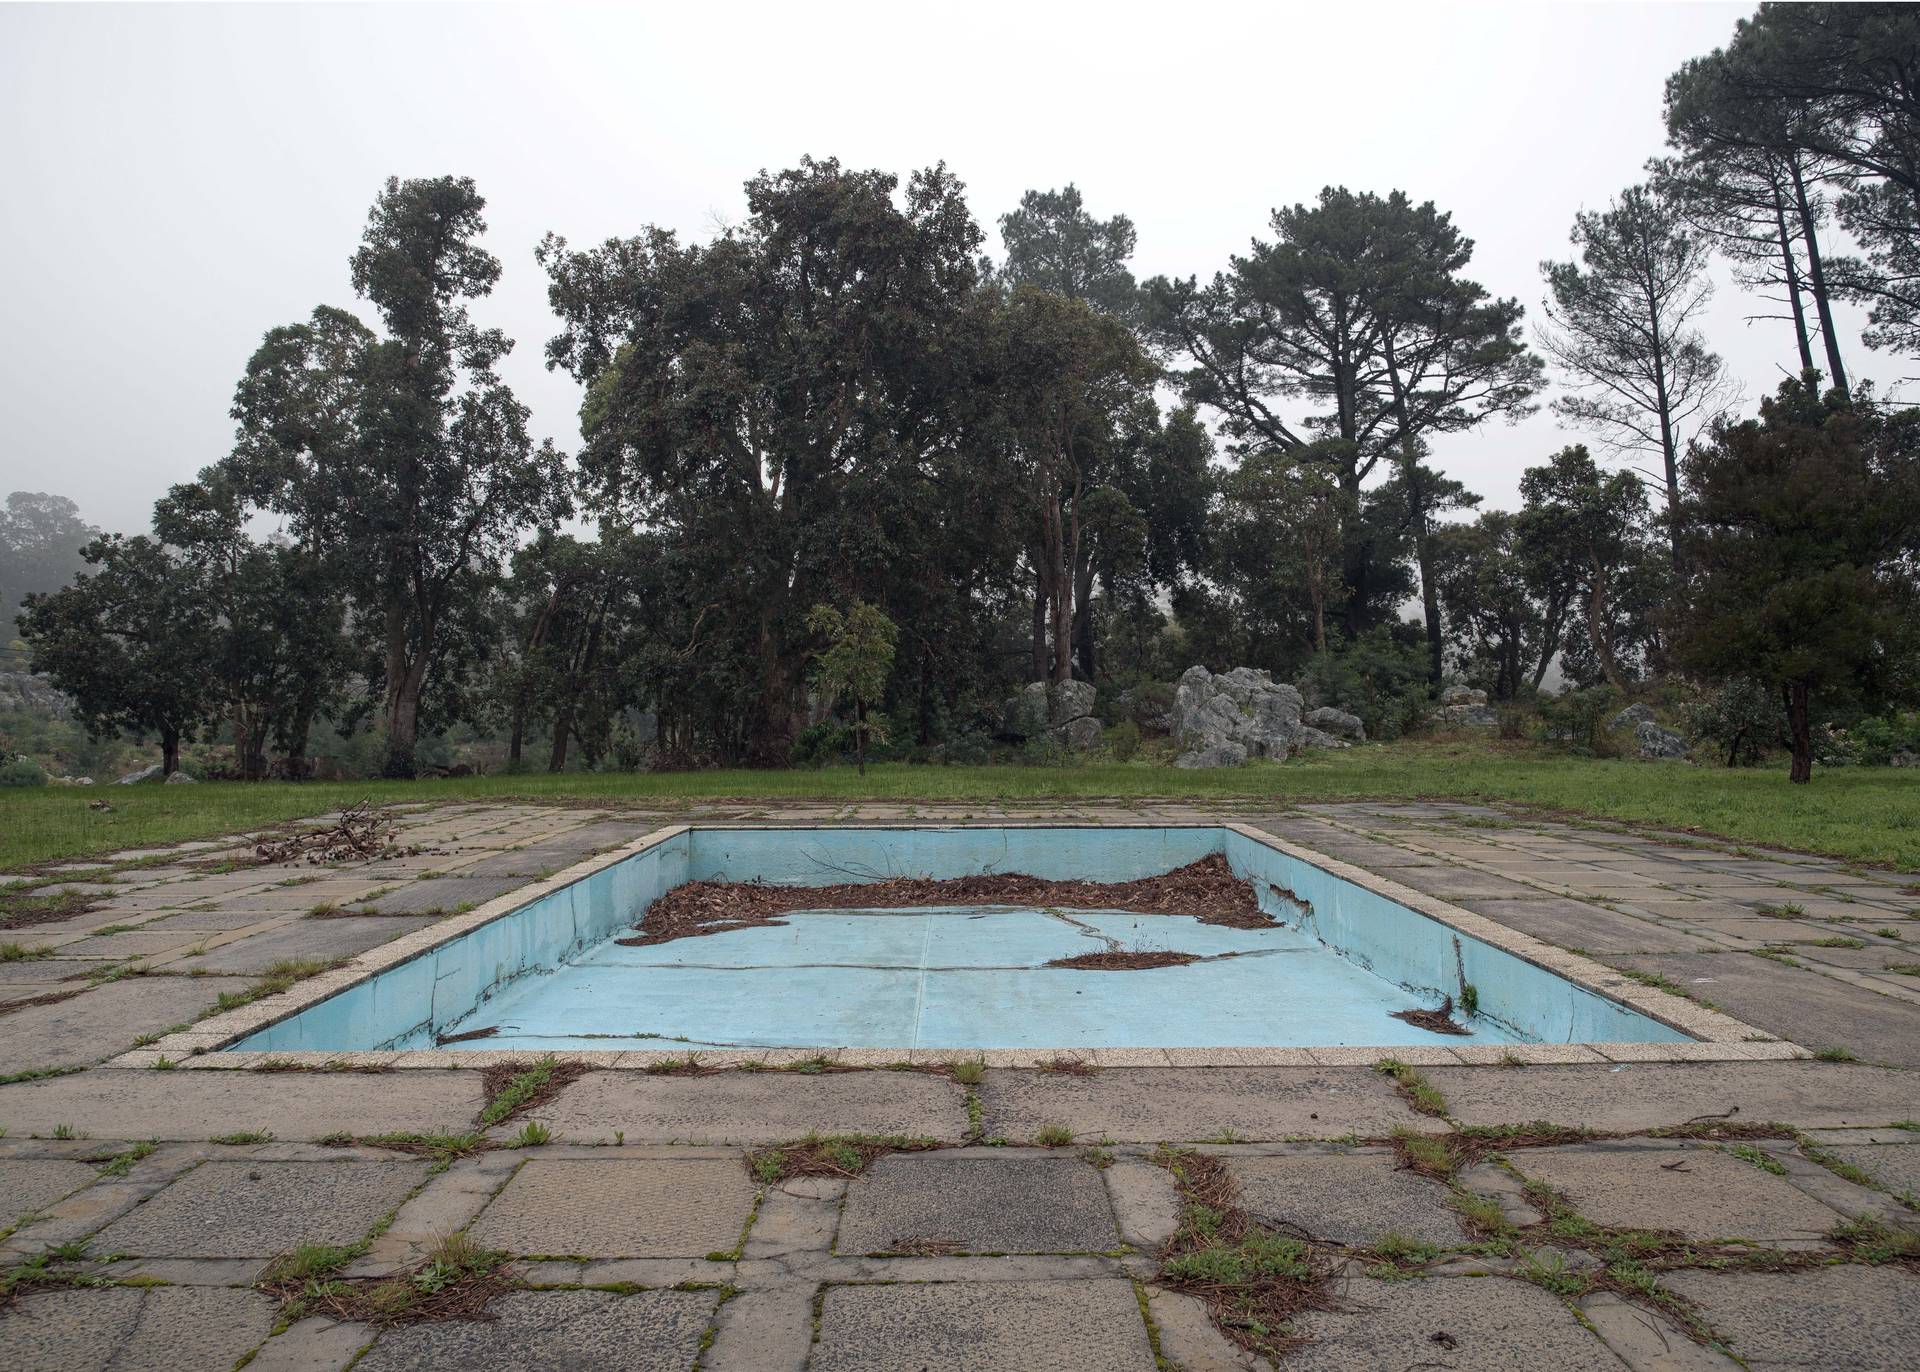 A pool located at the Steenbras Dam. Ironic that a pool located about 50 m from the Steenbras Dam is itself empty and dilapidated.